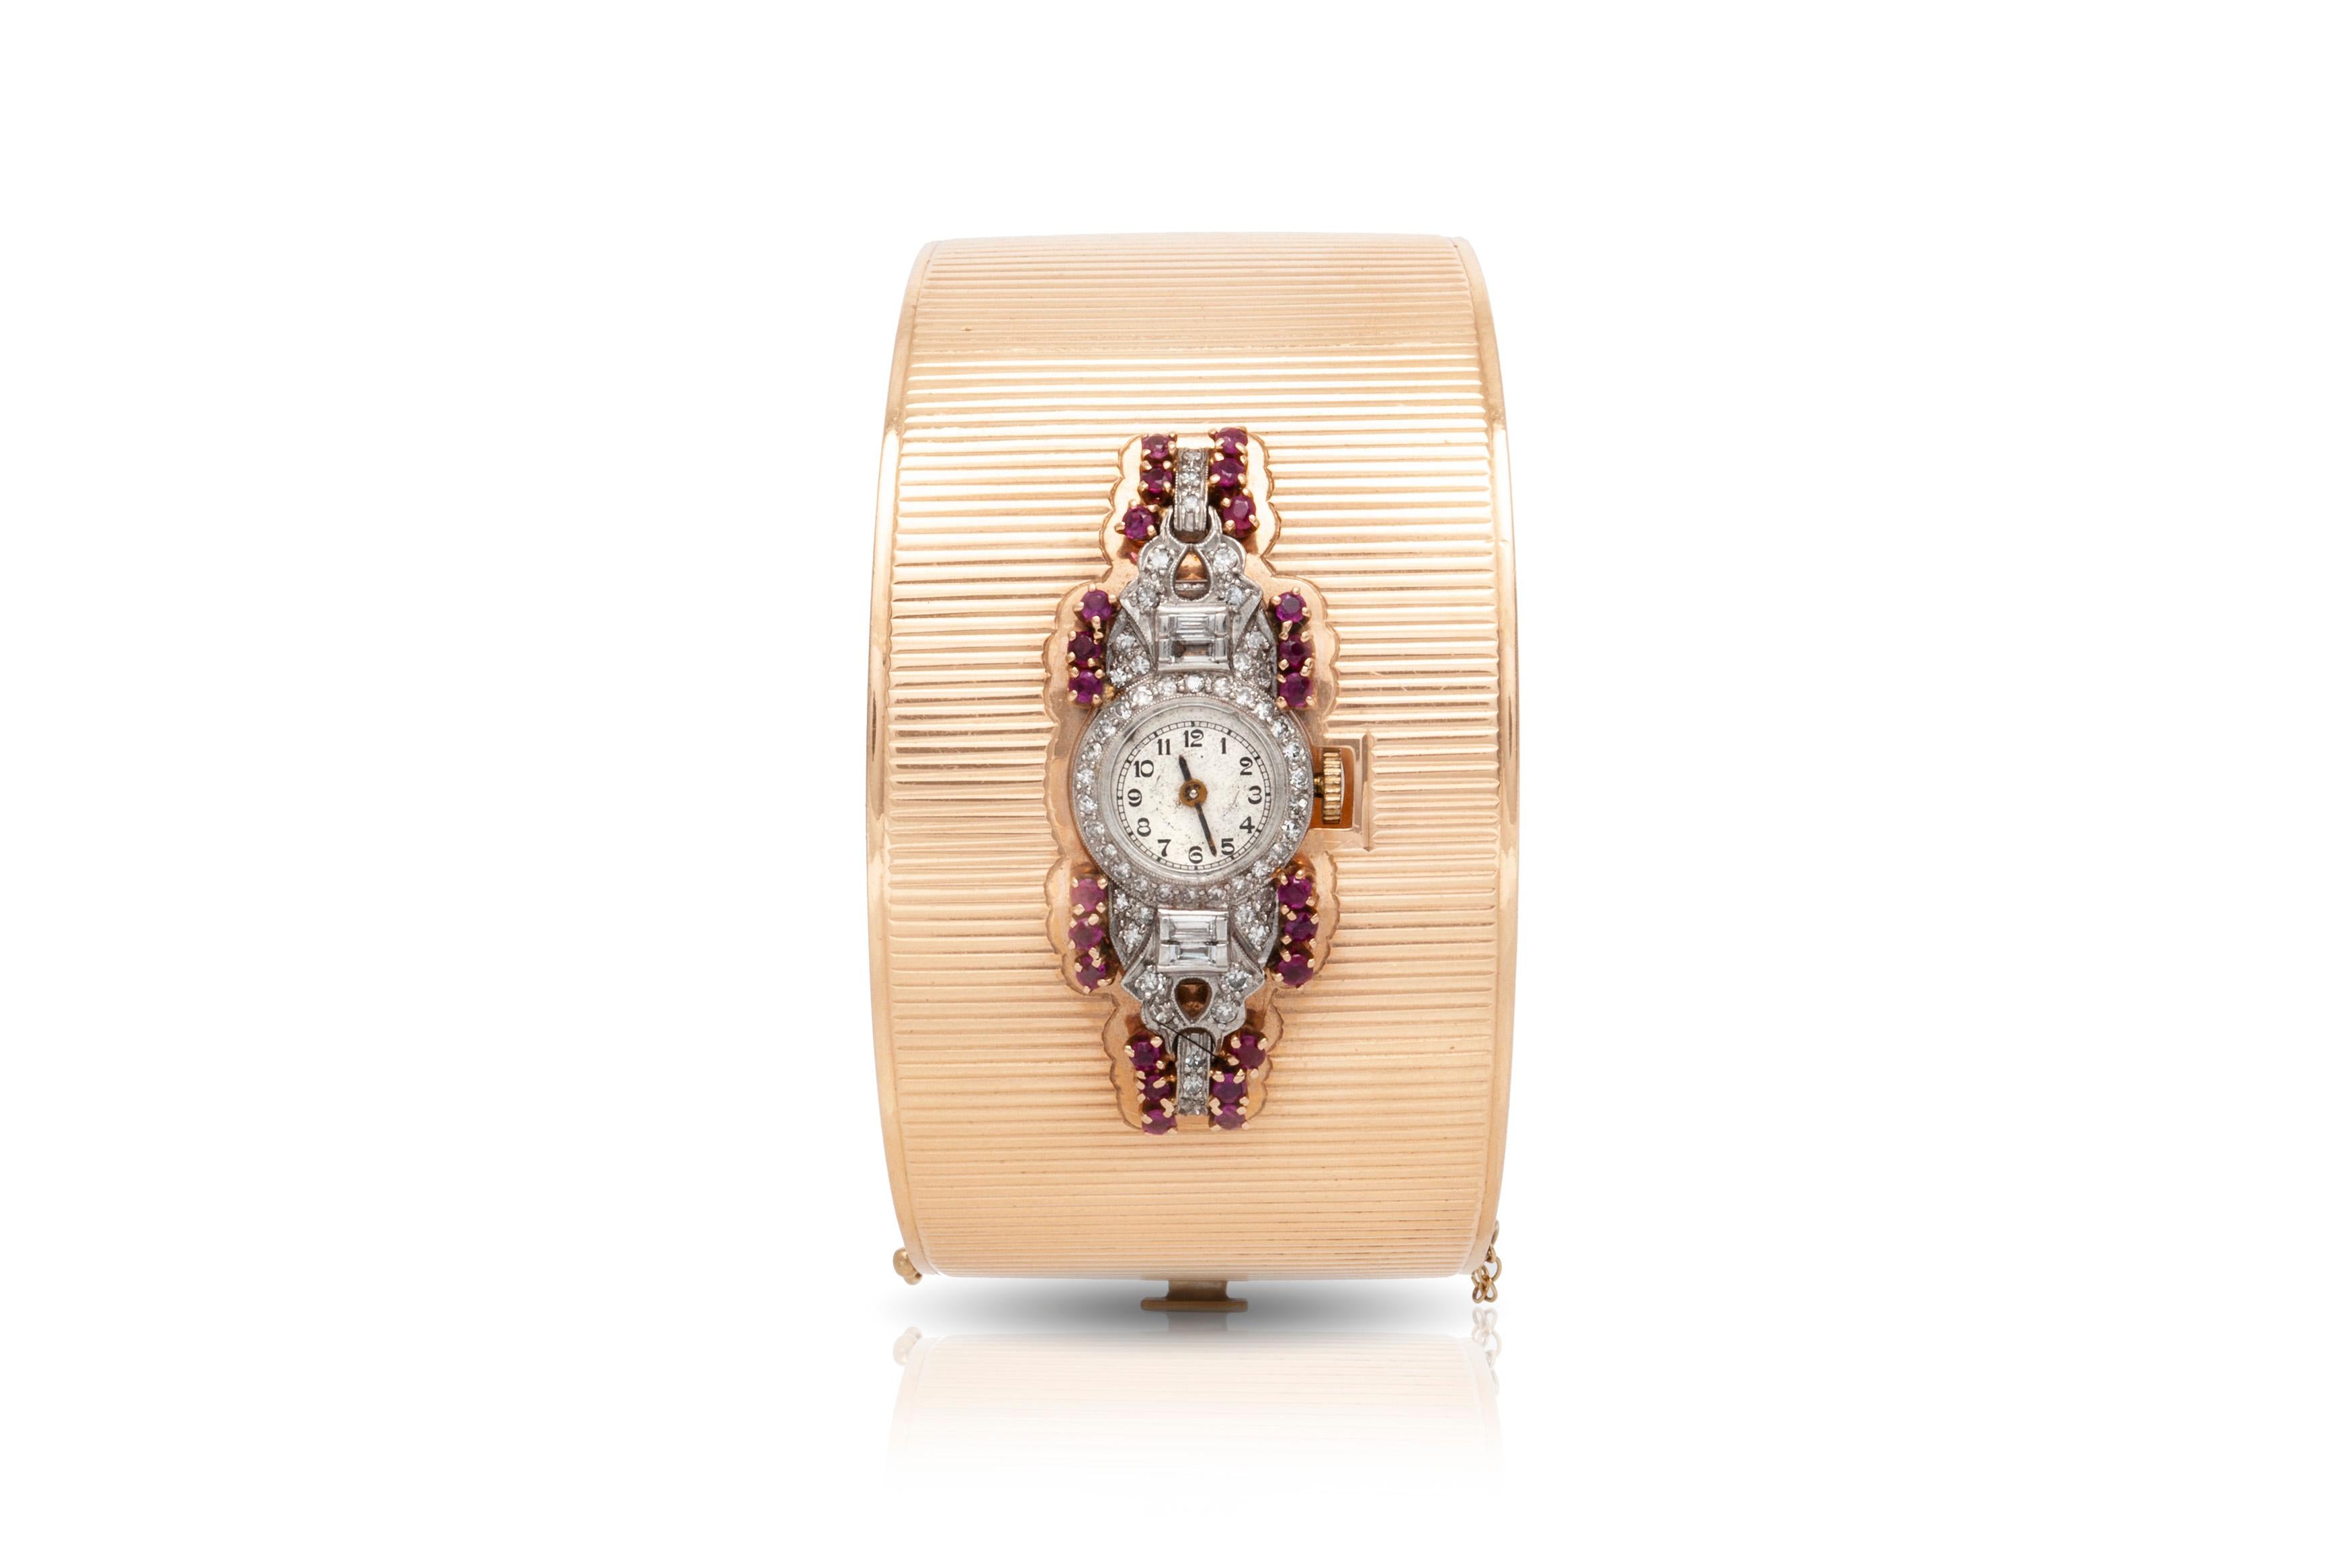 The watch is finely crafted in 14k pink gold and platinum face of the watch with ruby and diamonds.